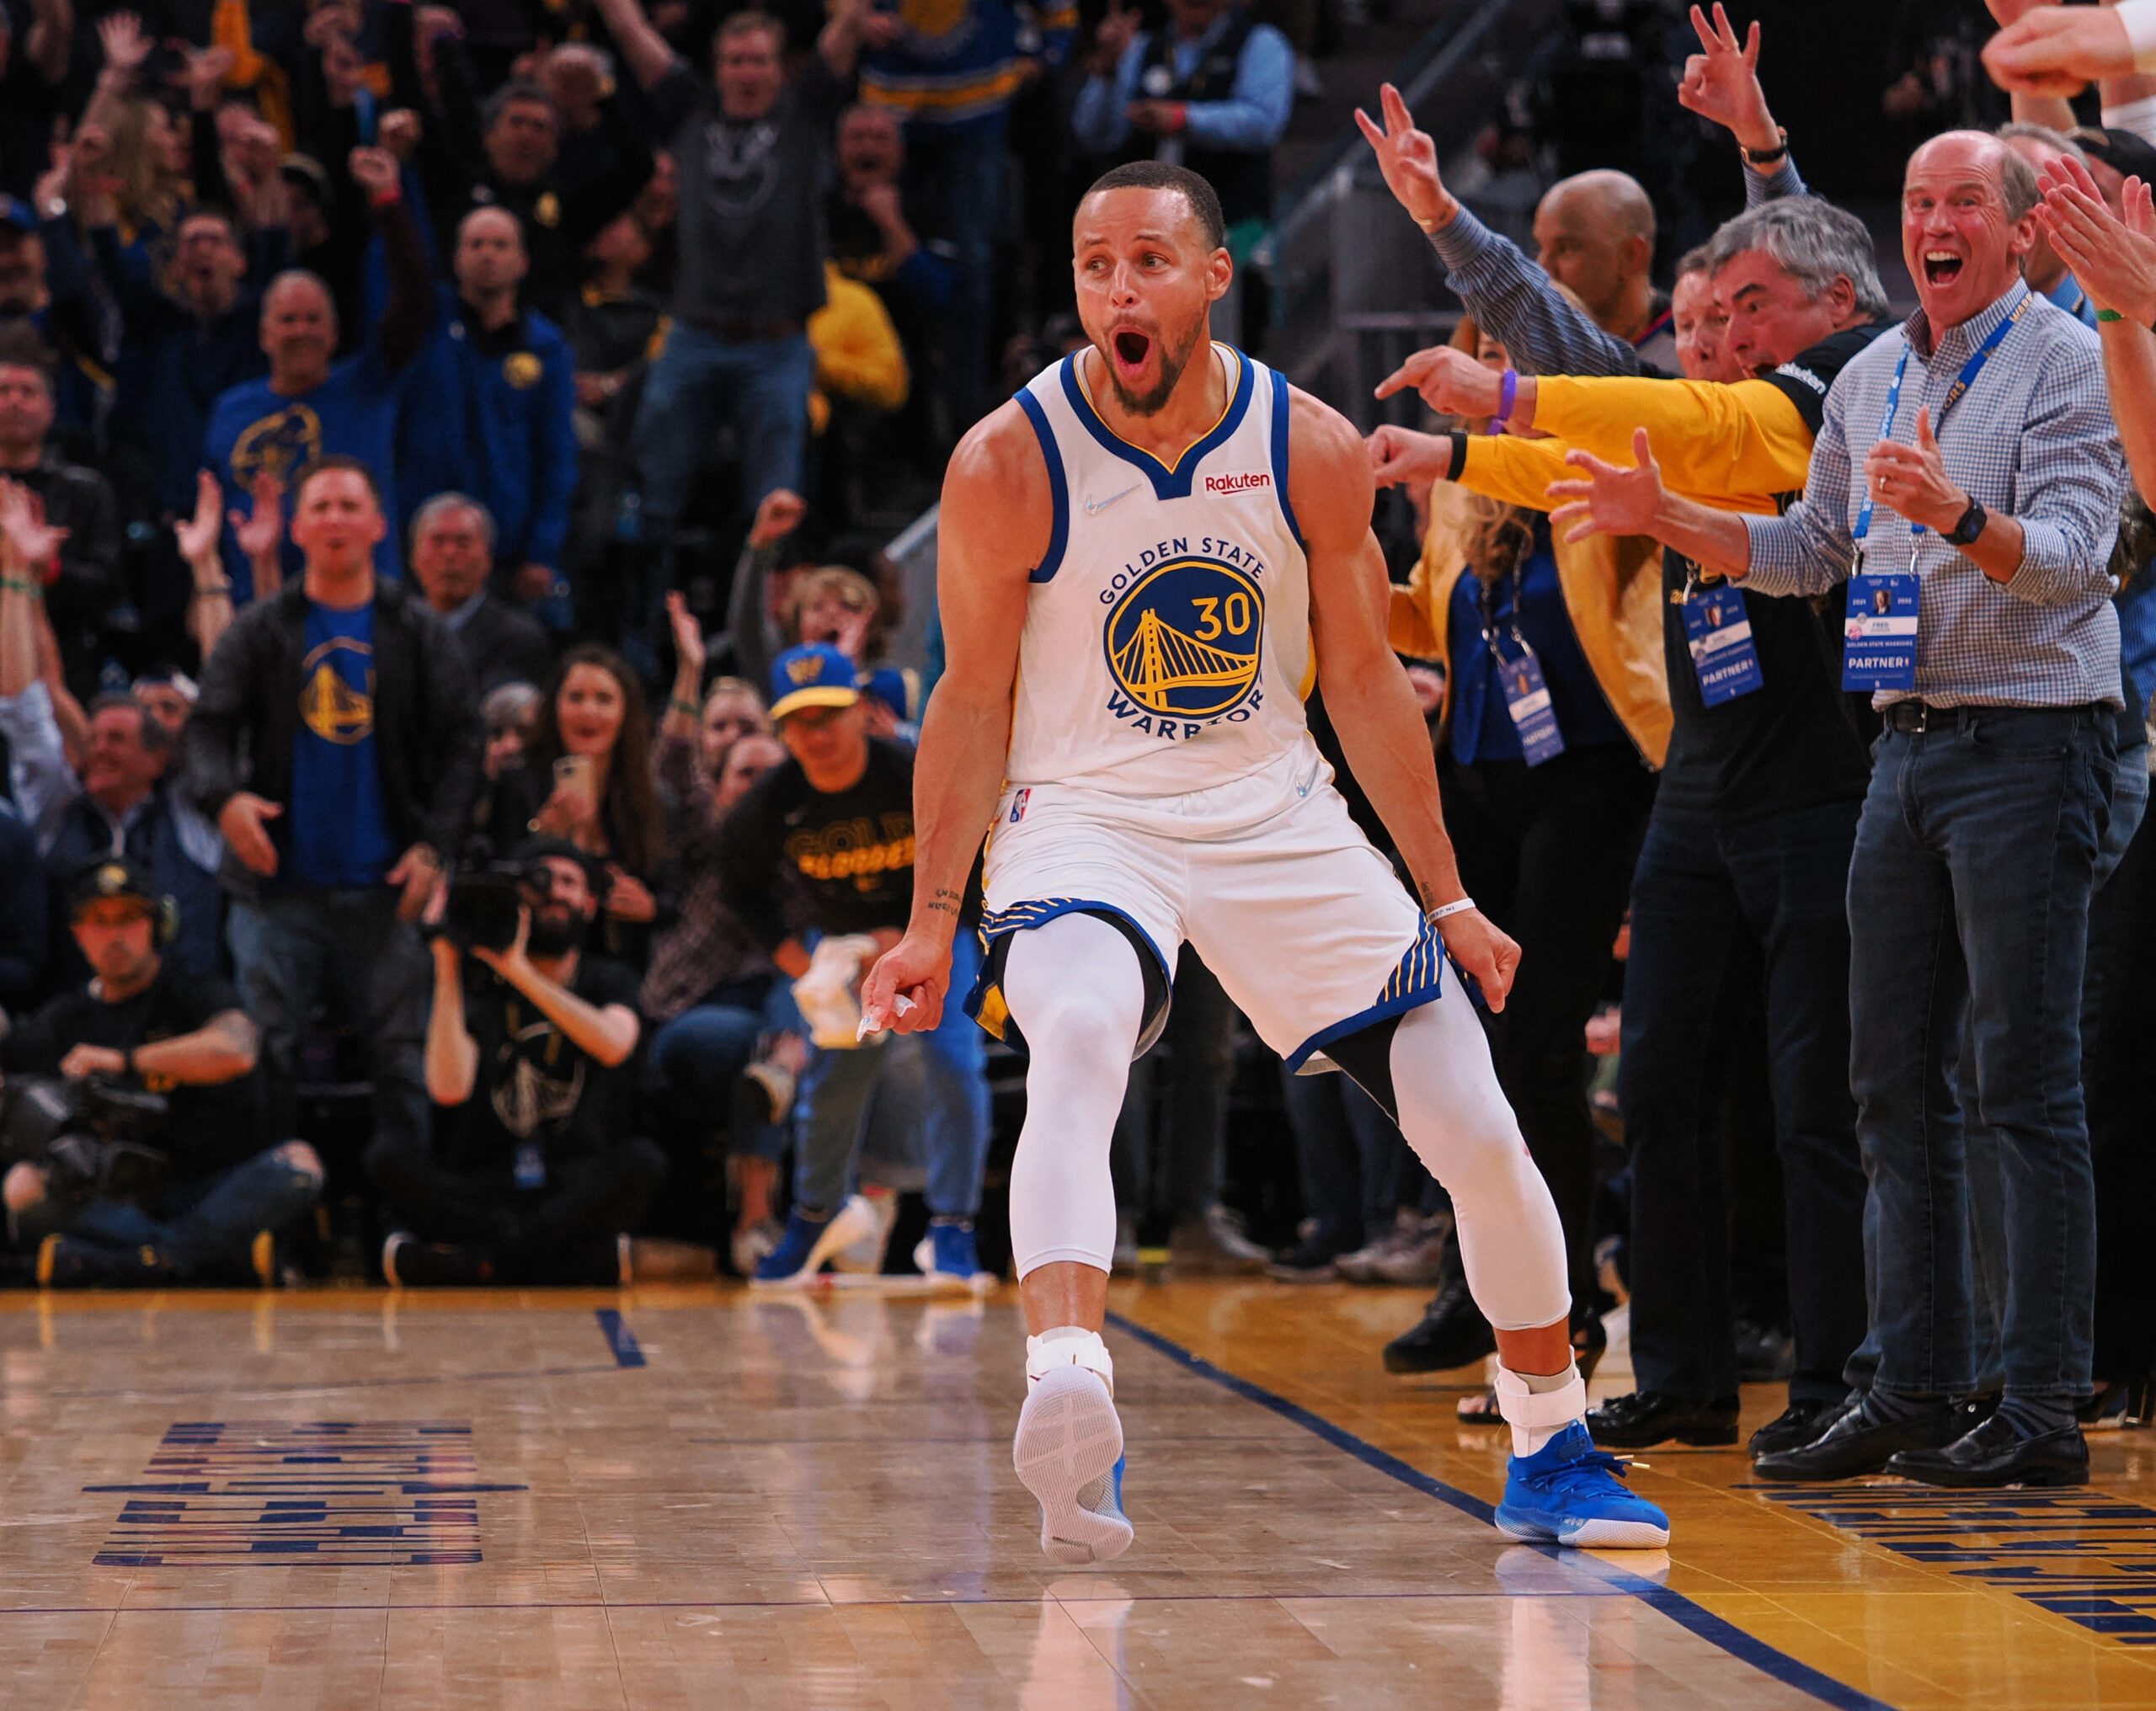 Super sub Steph Curry shines off bench as Warriors rout Nuggets again